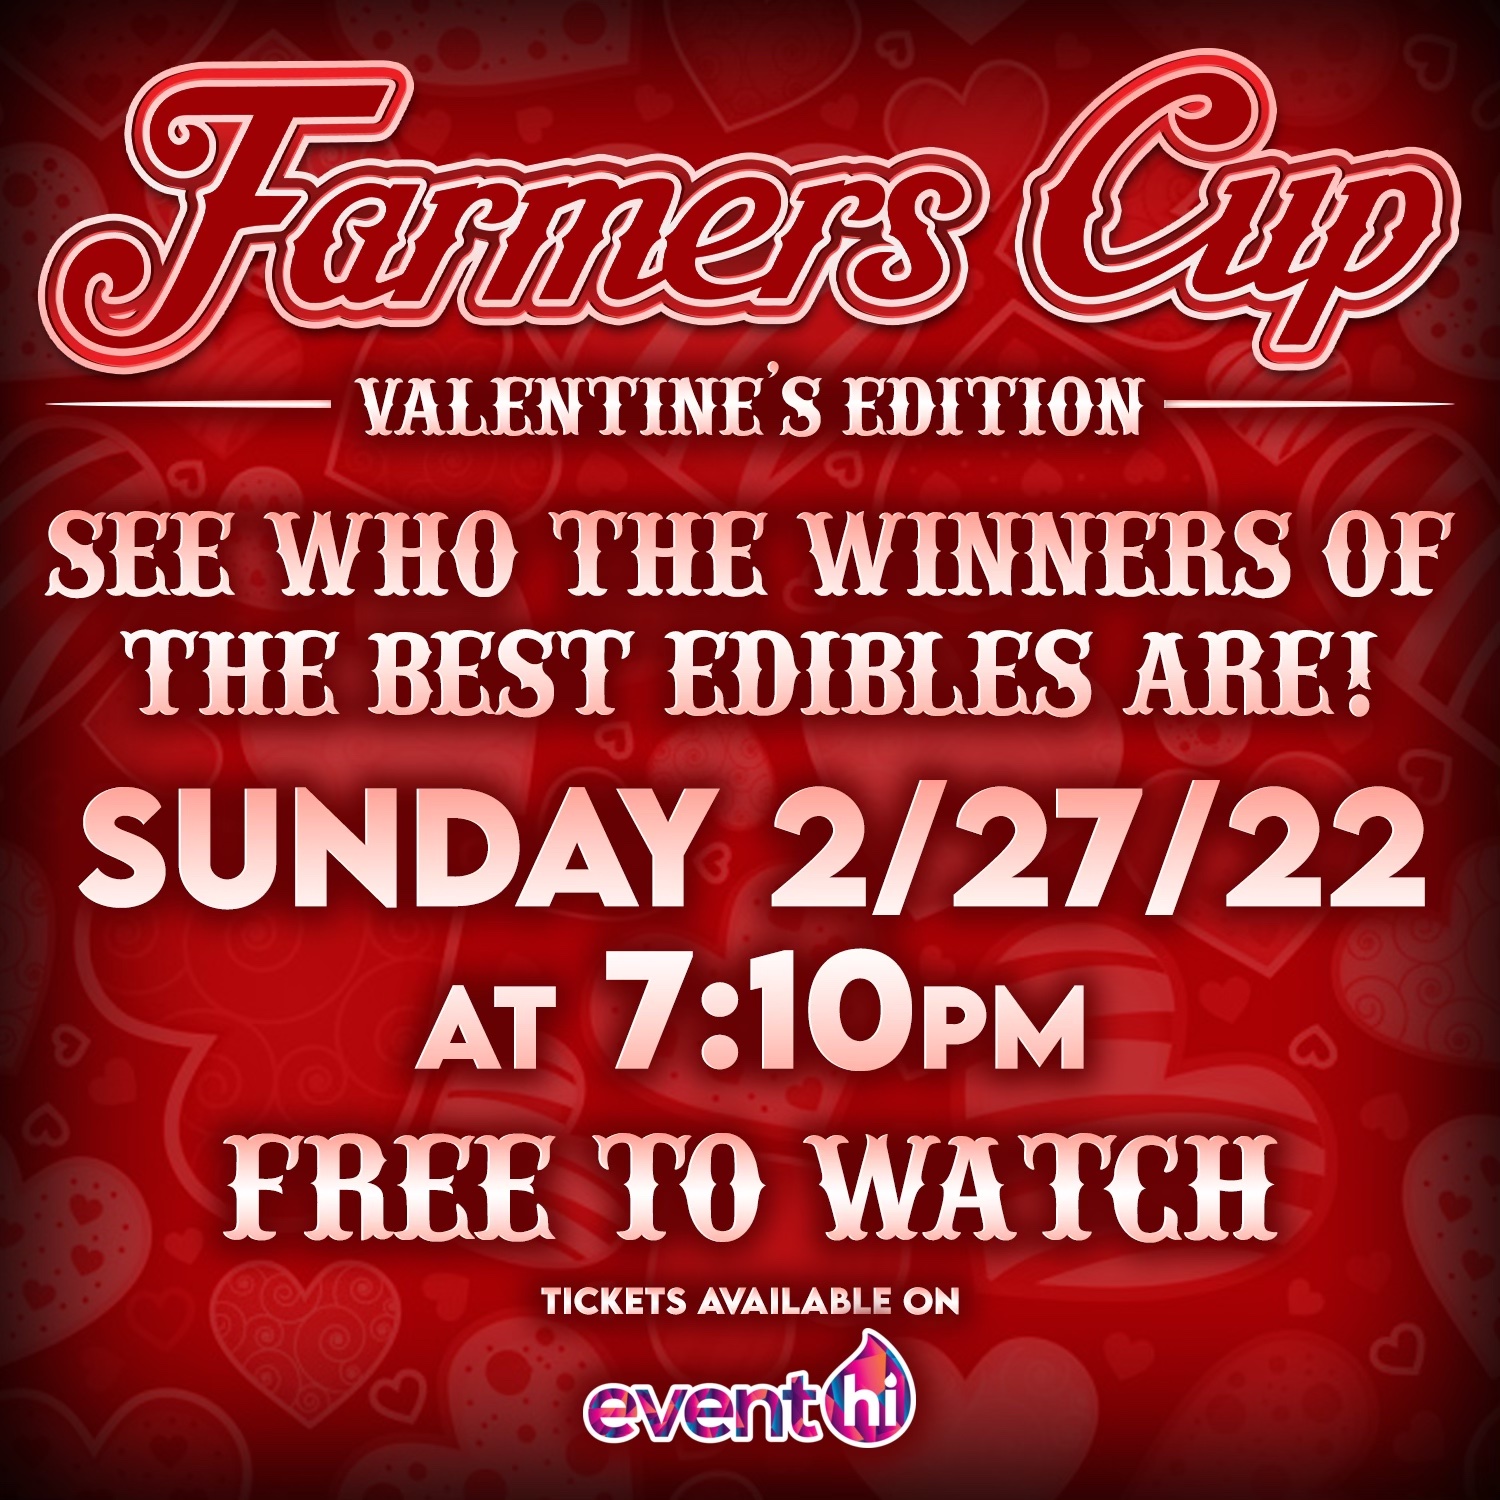 Farmers Cup Valentine's Edition Presents Award Ceremony